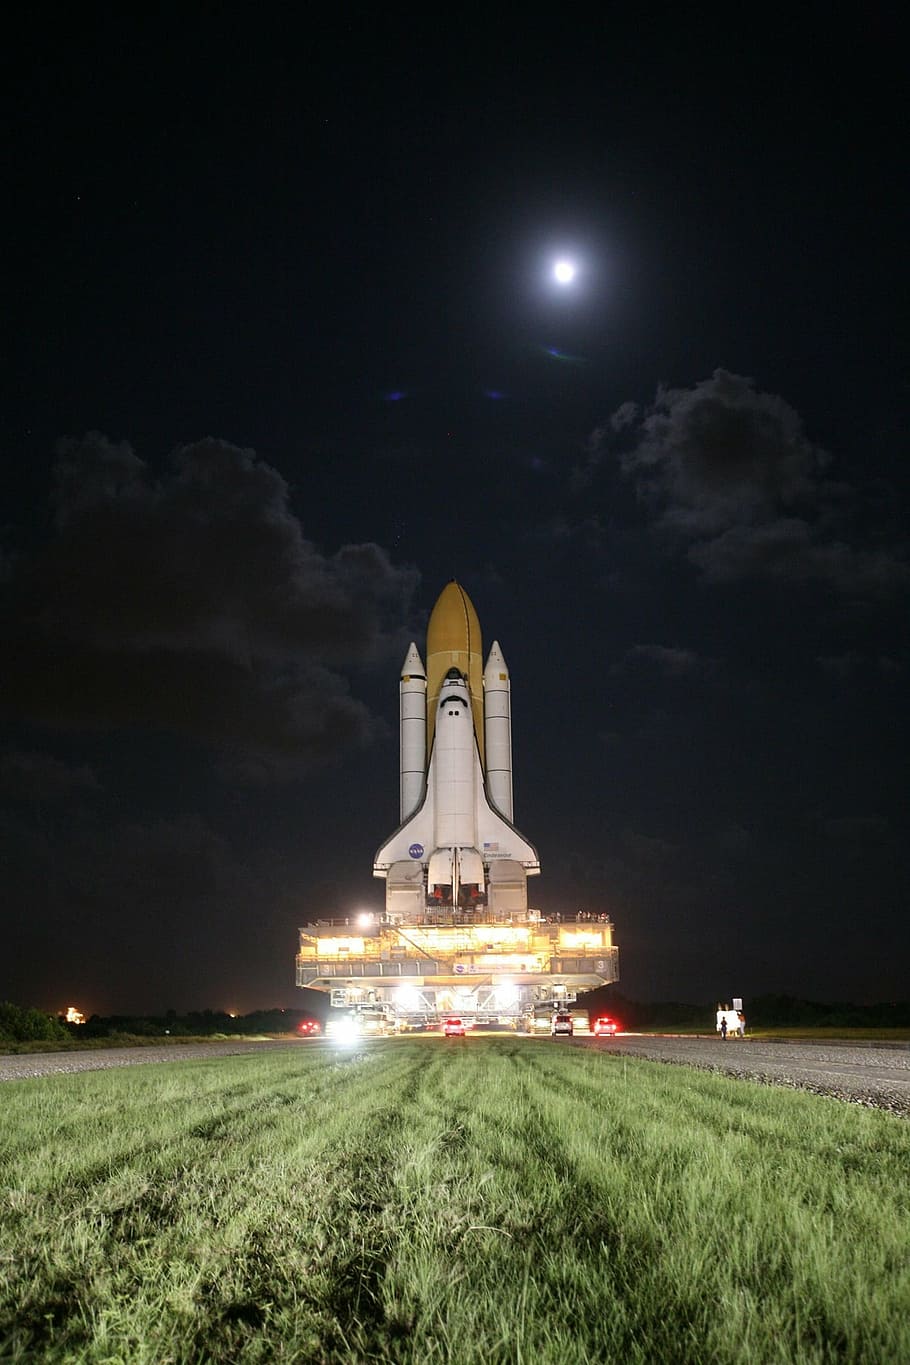 space shuttle on grass, rollout, moon, waning, stars, night, launch